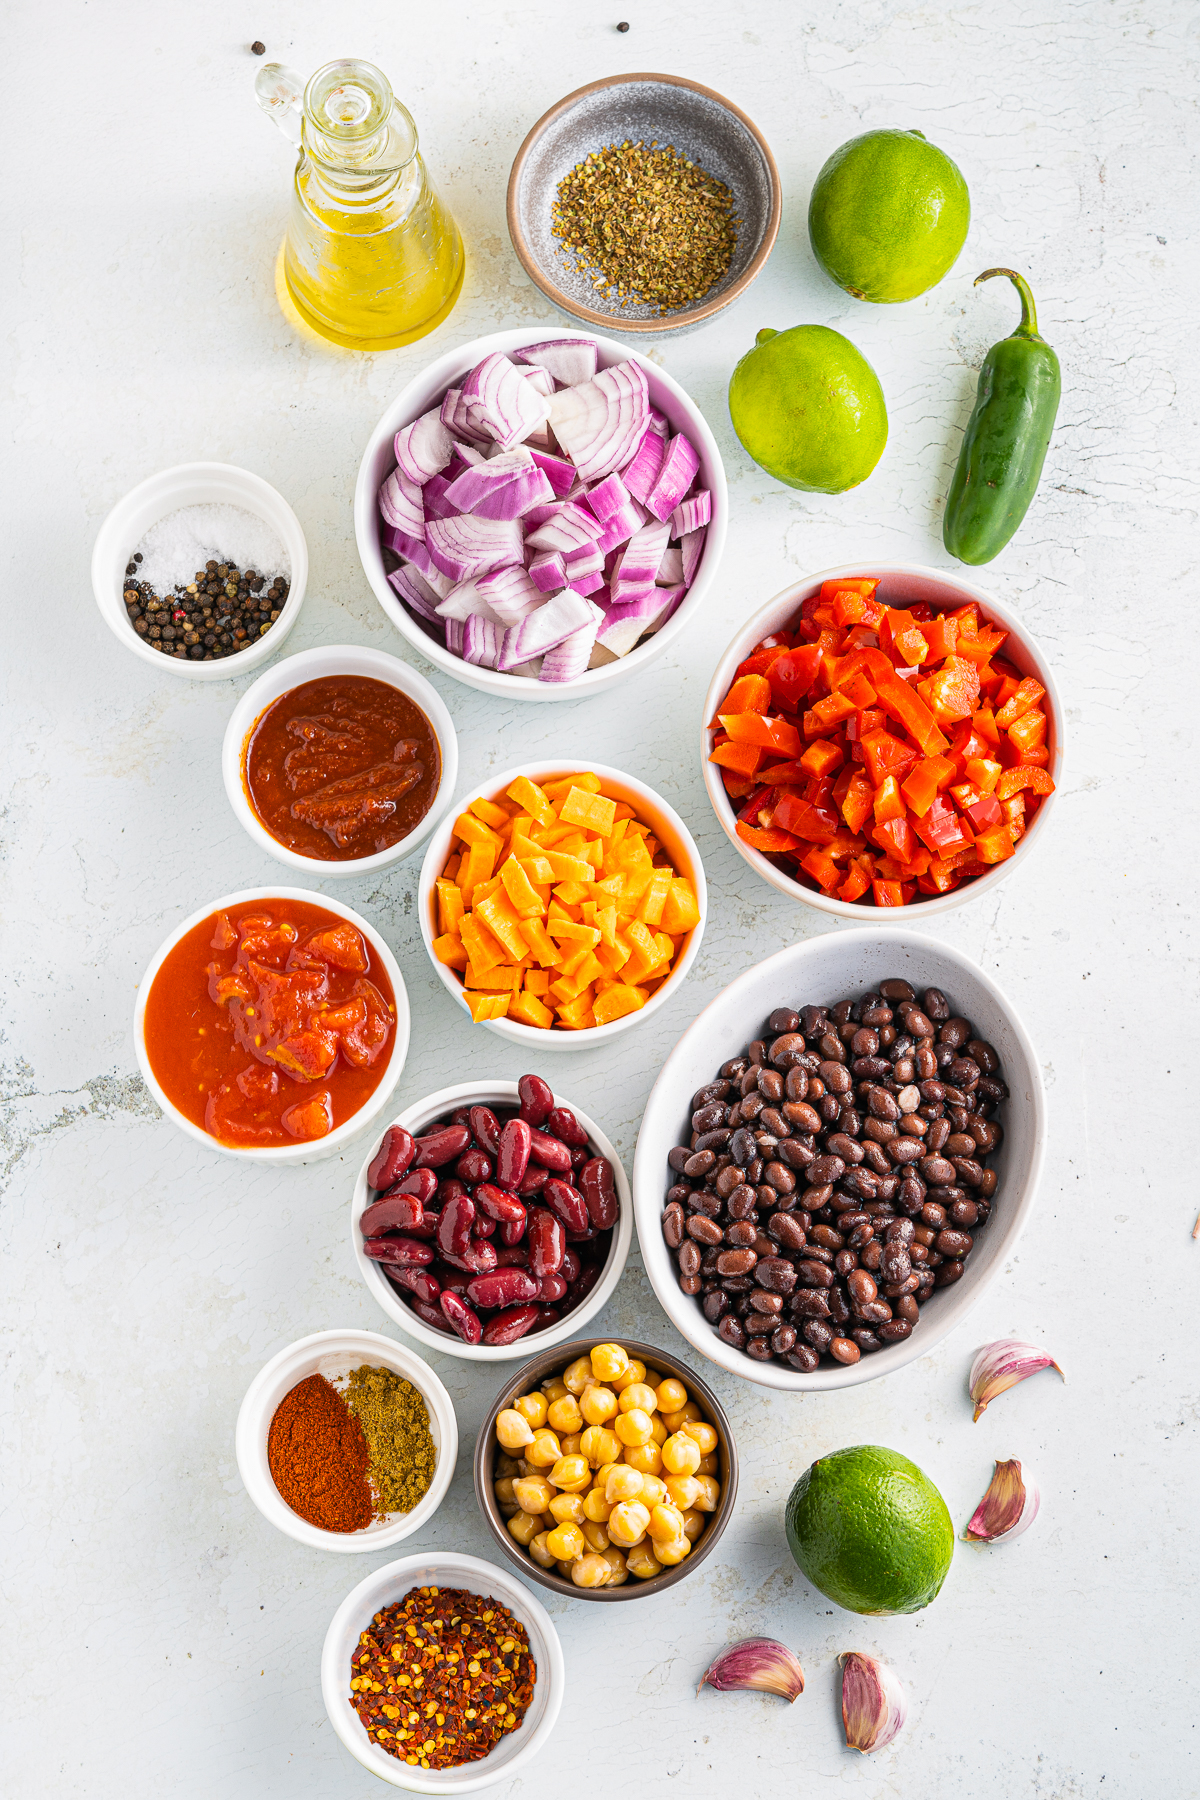 Ingredients needed to make a Vegetarian Chilii Recipe.